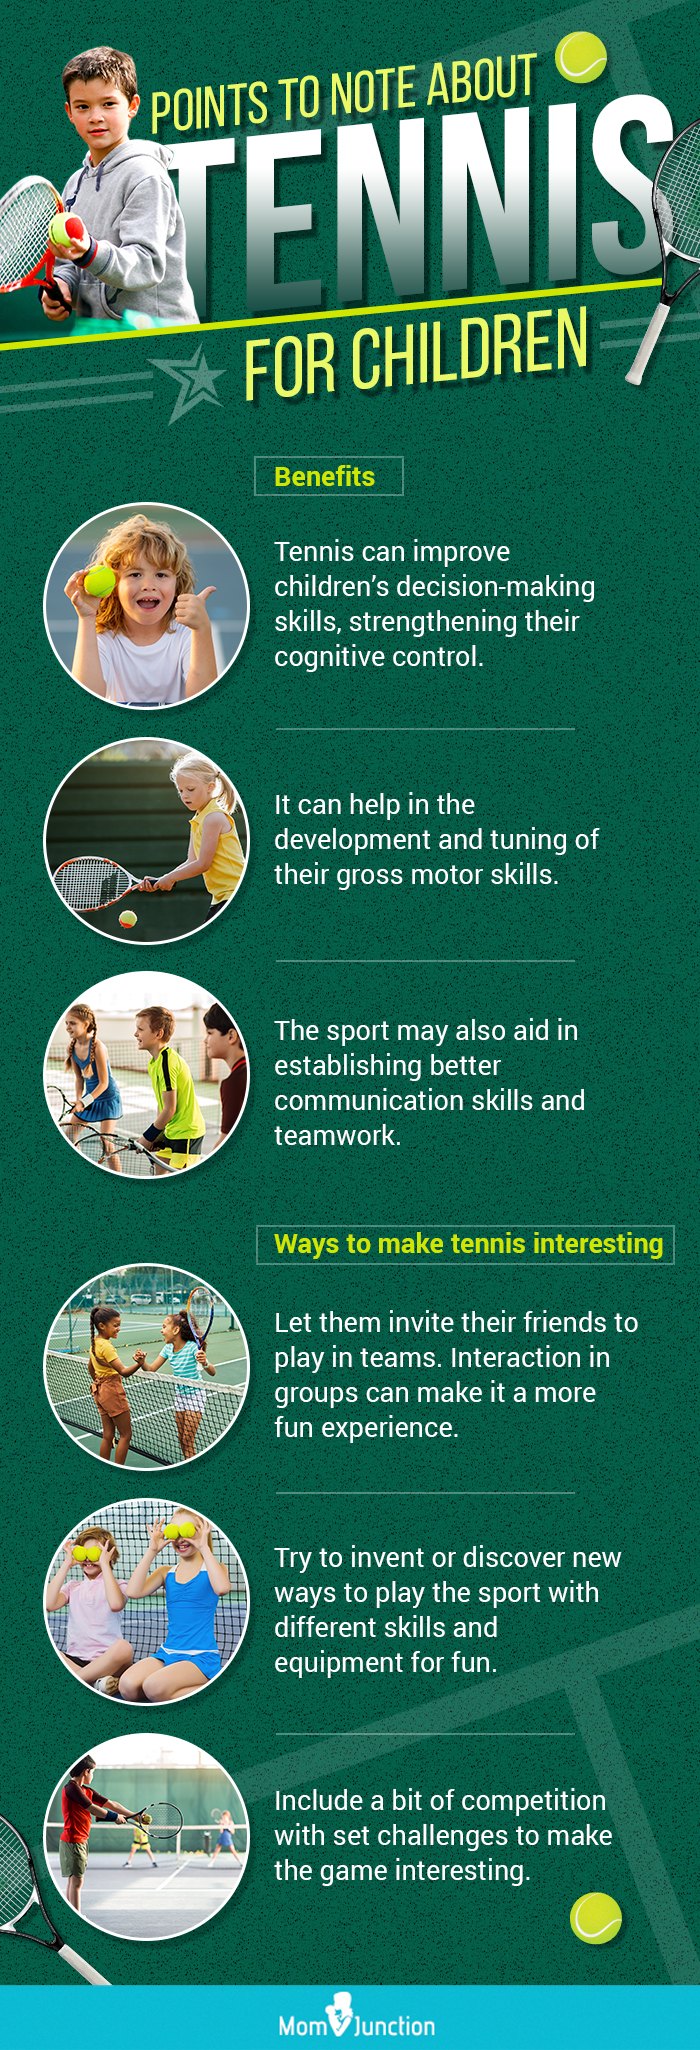 11 Very Interesting Fun Facts About Tennis For Kids